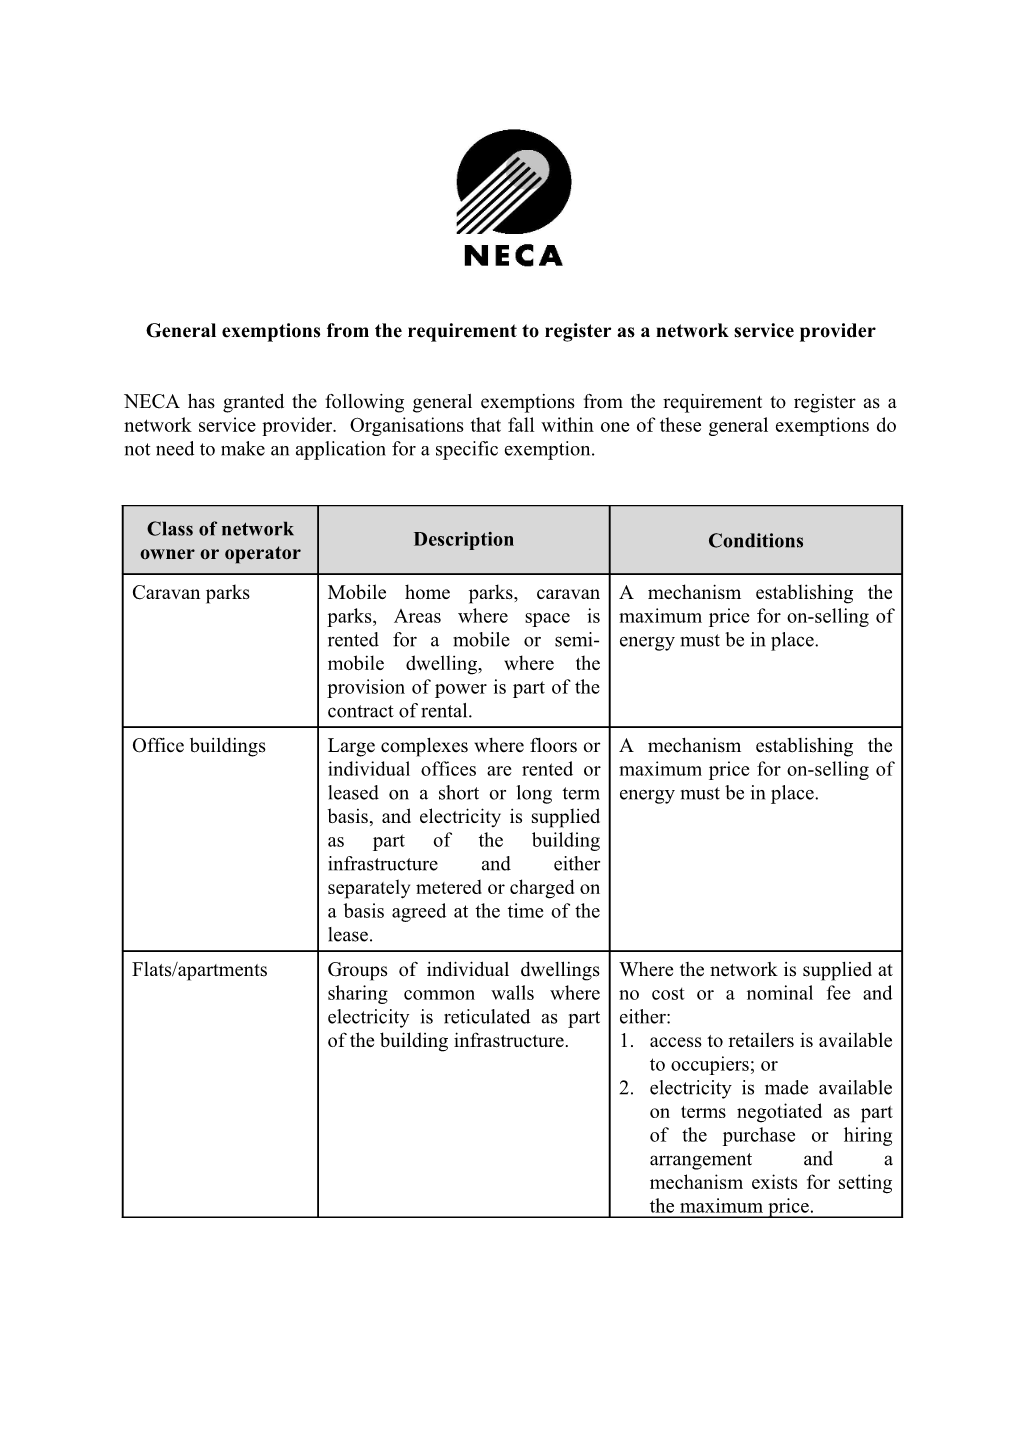 General Exemptions from the Requirement to Register As a Network Service Provider